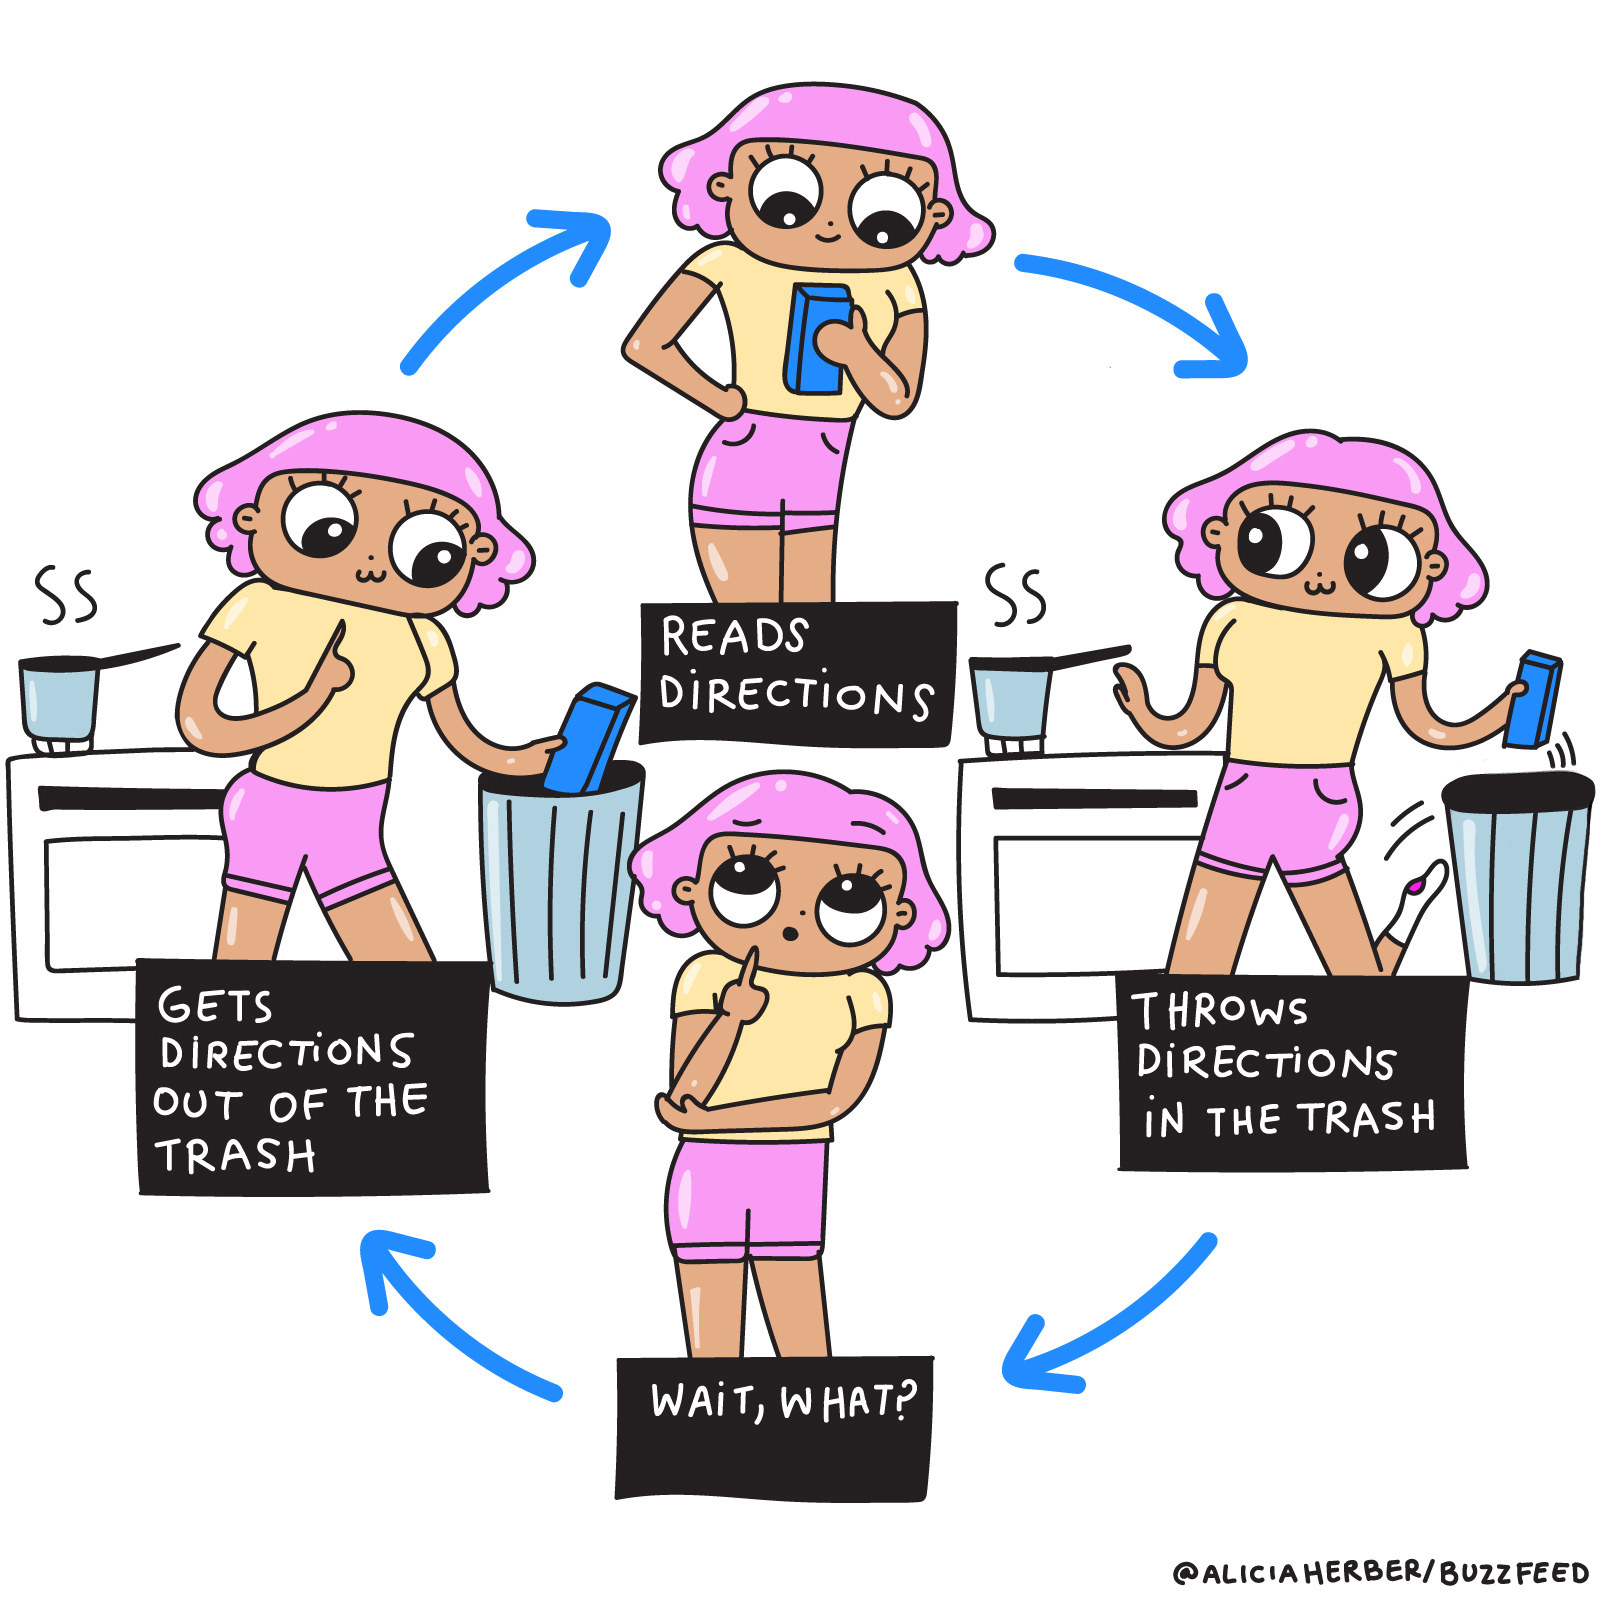 A cartoon of a young woman reading a recipe, then throwing the directions in the trash, then picking them out of the trash